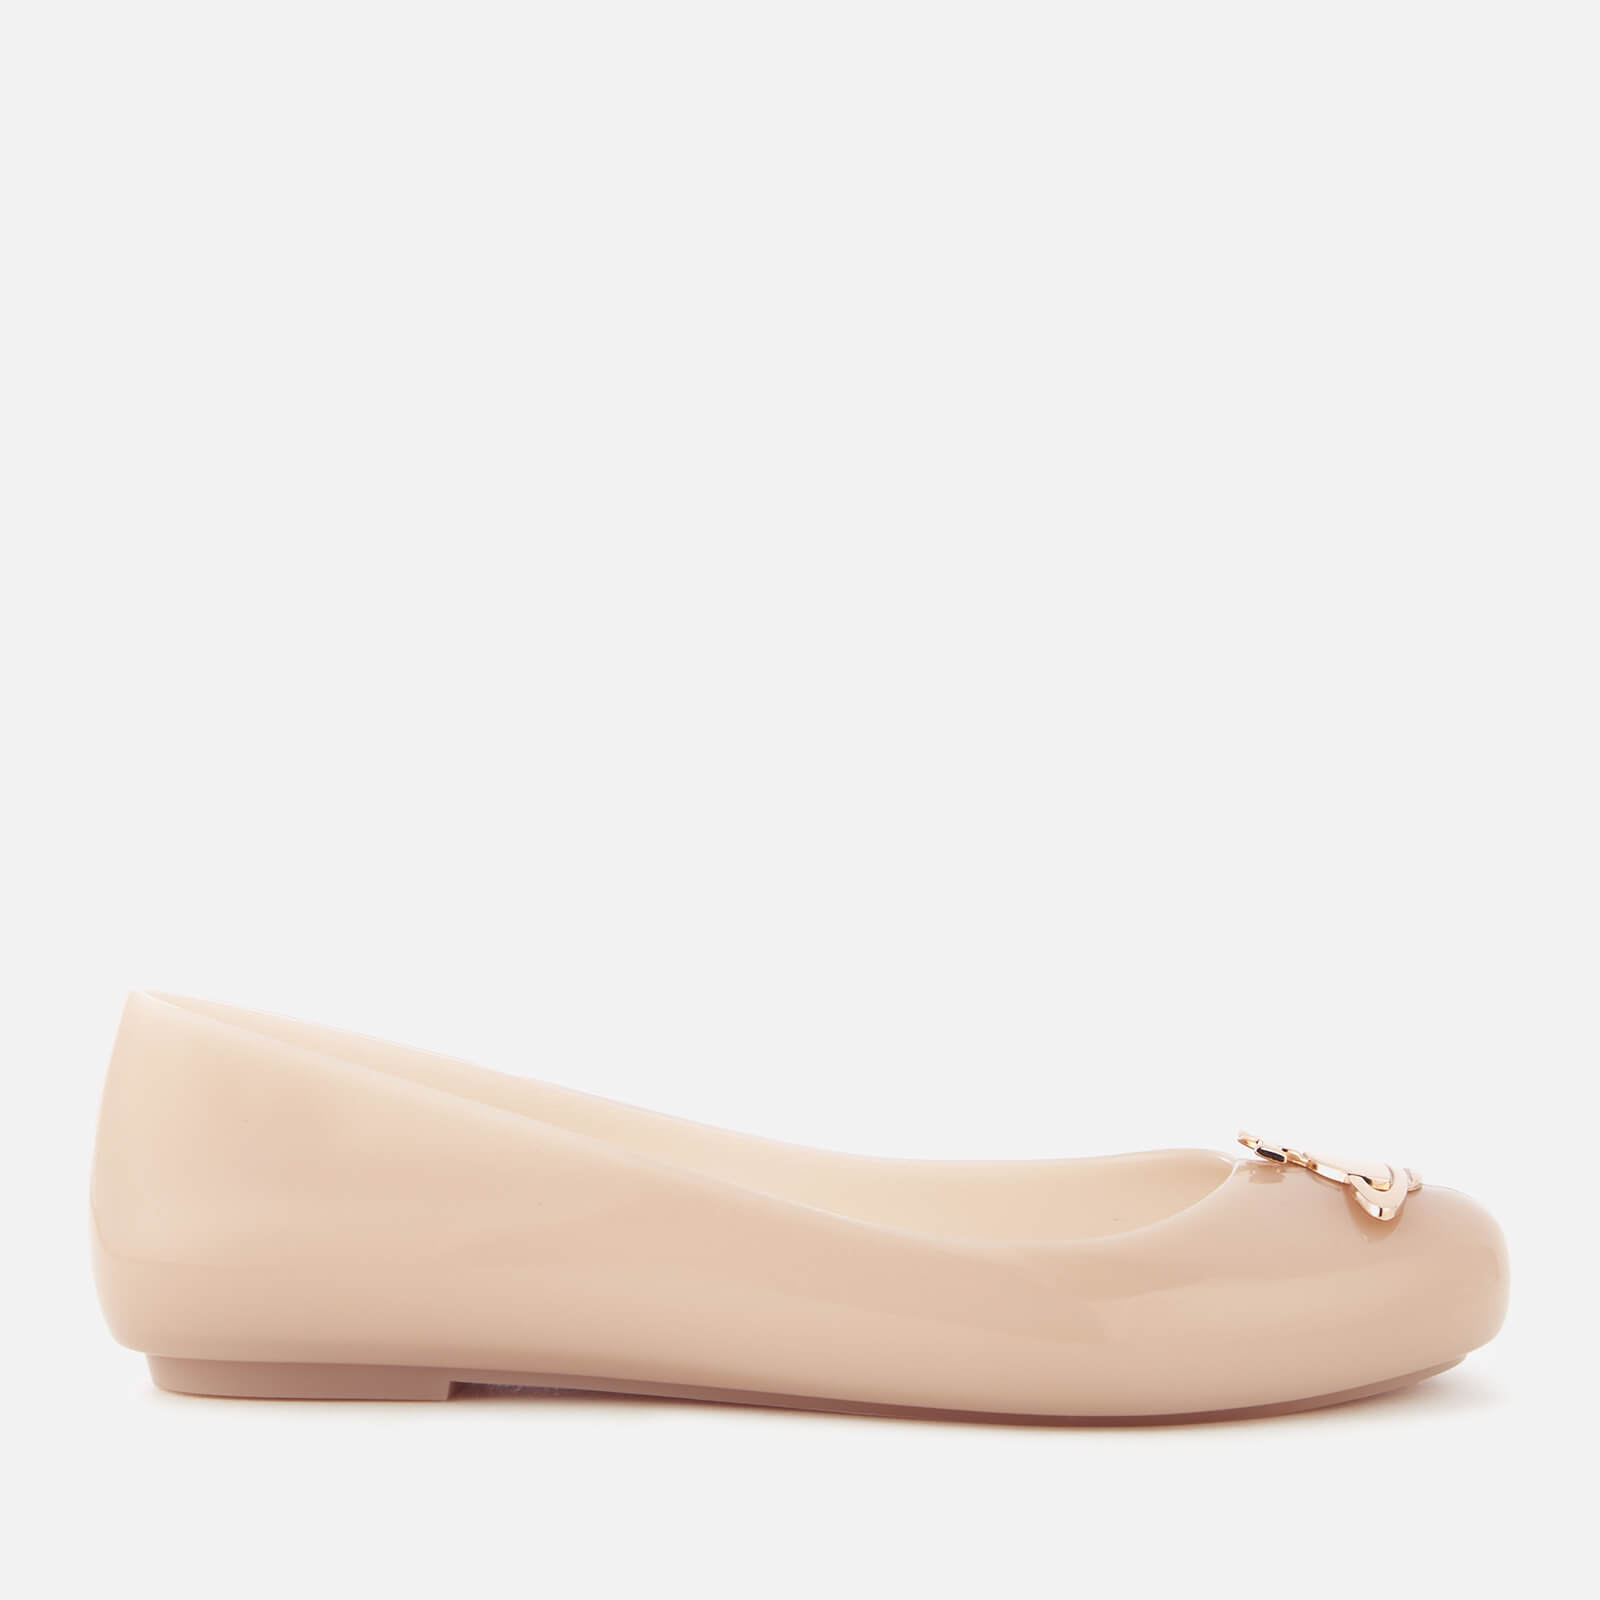 Space Love 19 Ballet Flats - Nude Orb 